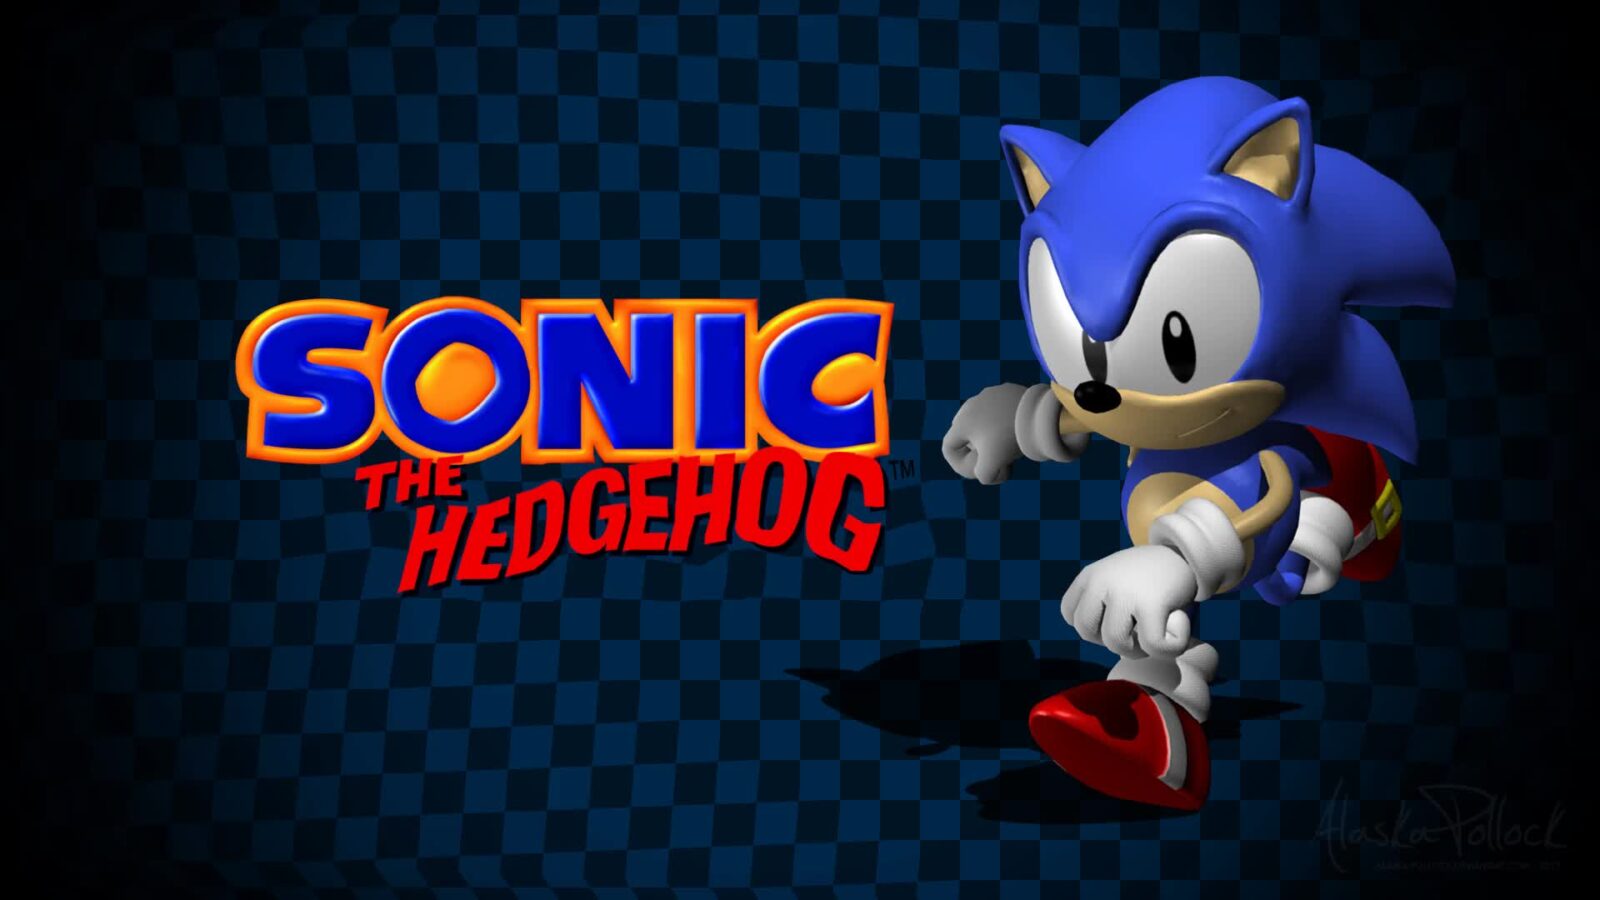 LiveWallpapers4Free.com | Sonic The Hedgenog Abstract Shapes - Free Live Wallpaper